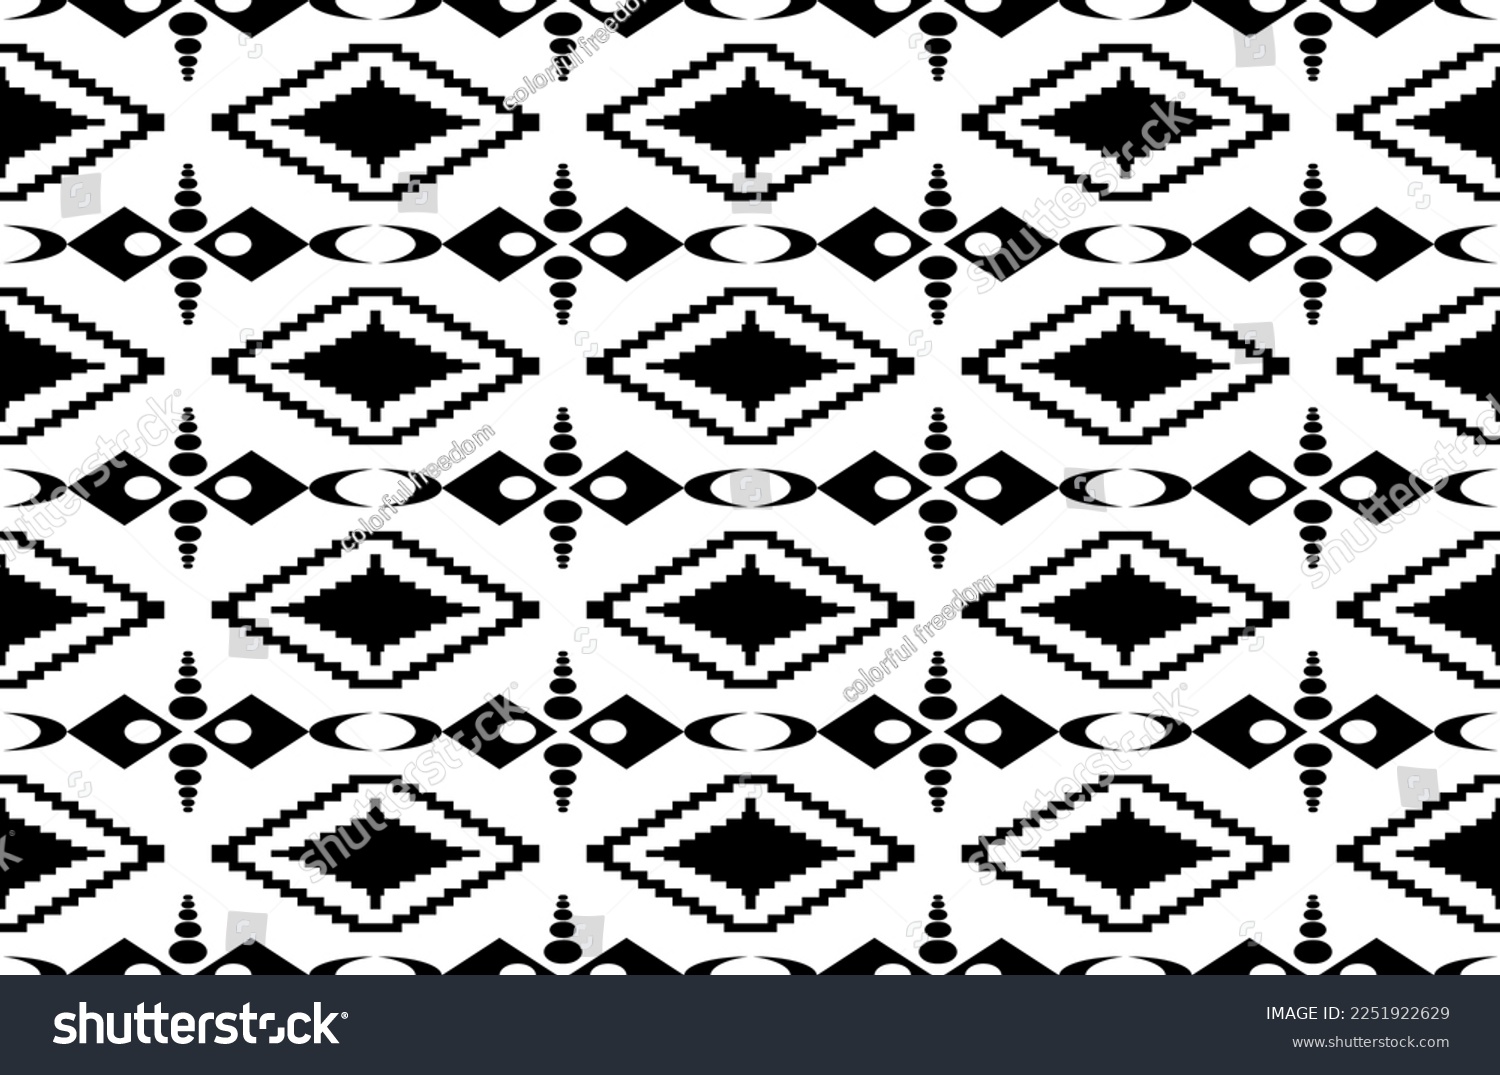 SVG of Graphic design of colorful ethnic fabric pattern or style clothing fashion. Vector illustration. svg